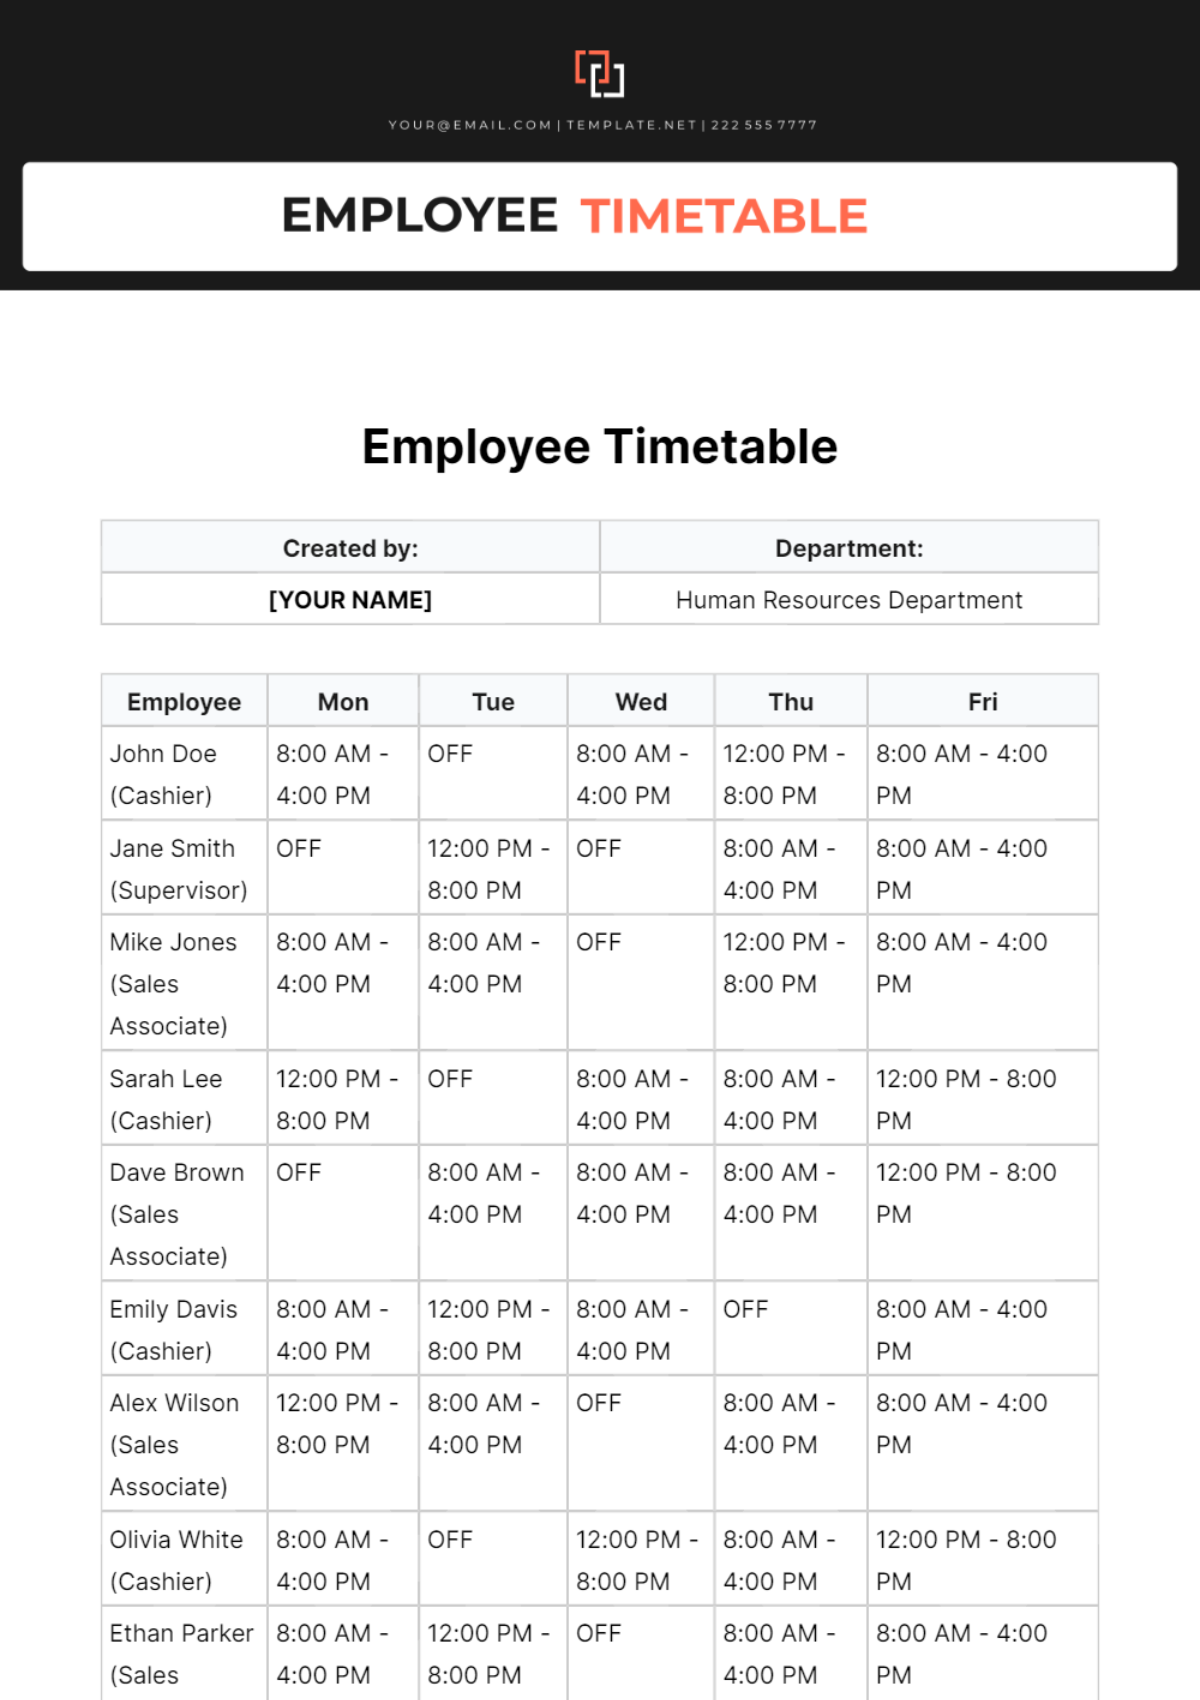 Free Employee Timetable Template